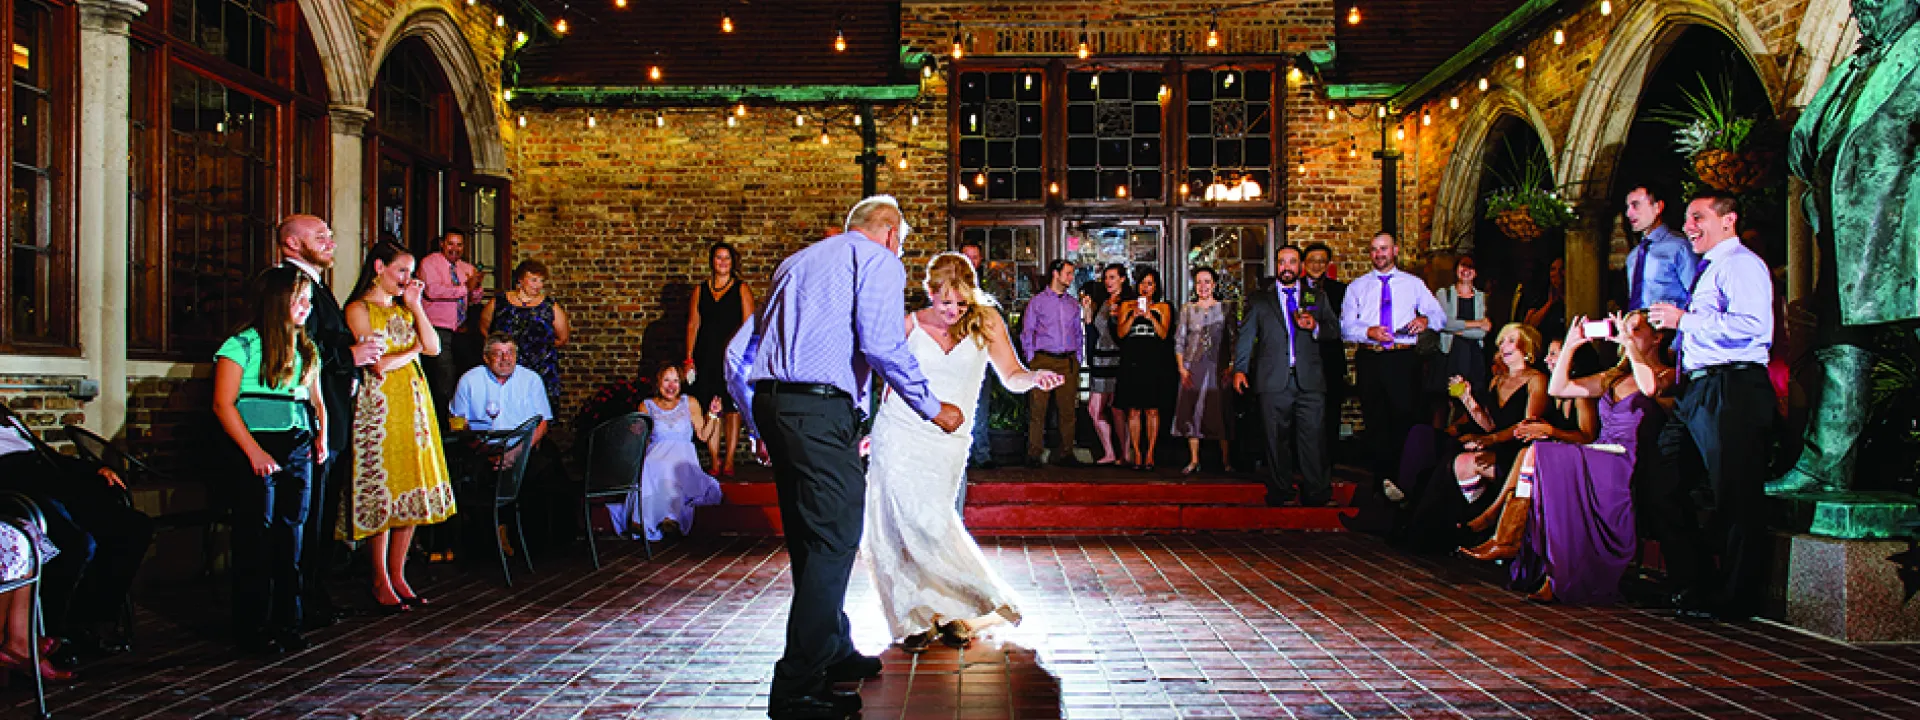 A father-daughter dance at the Best Place at the Historic Pabst Brewery in Milwaukee.